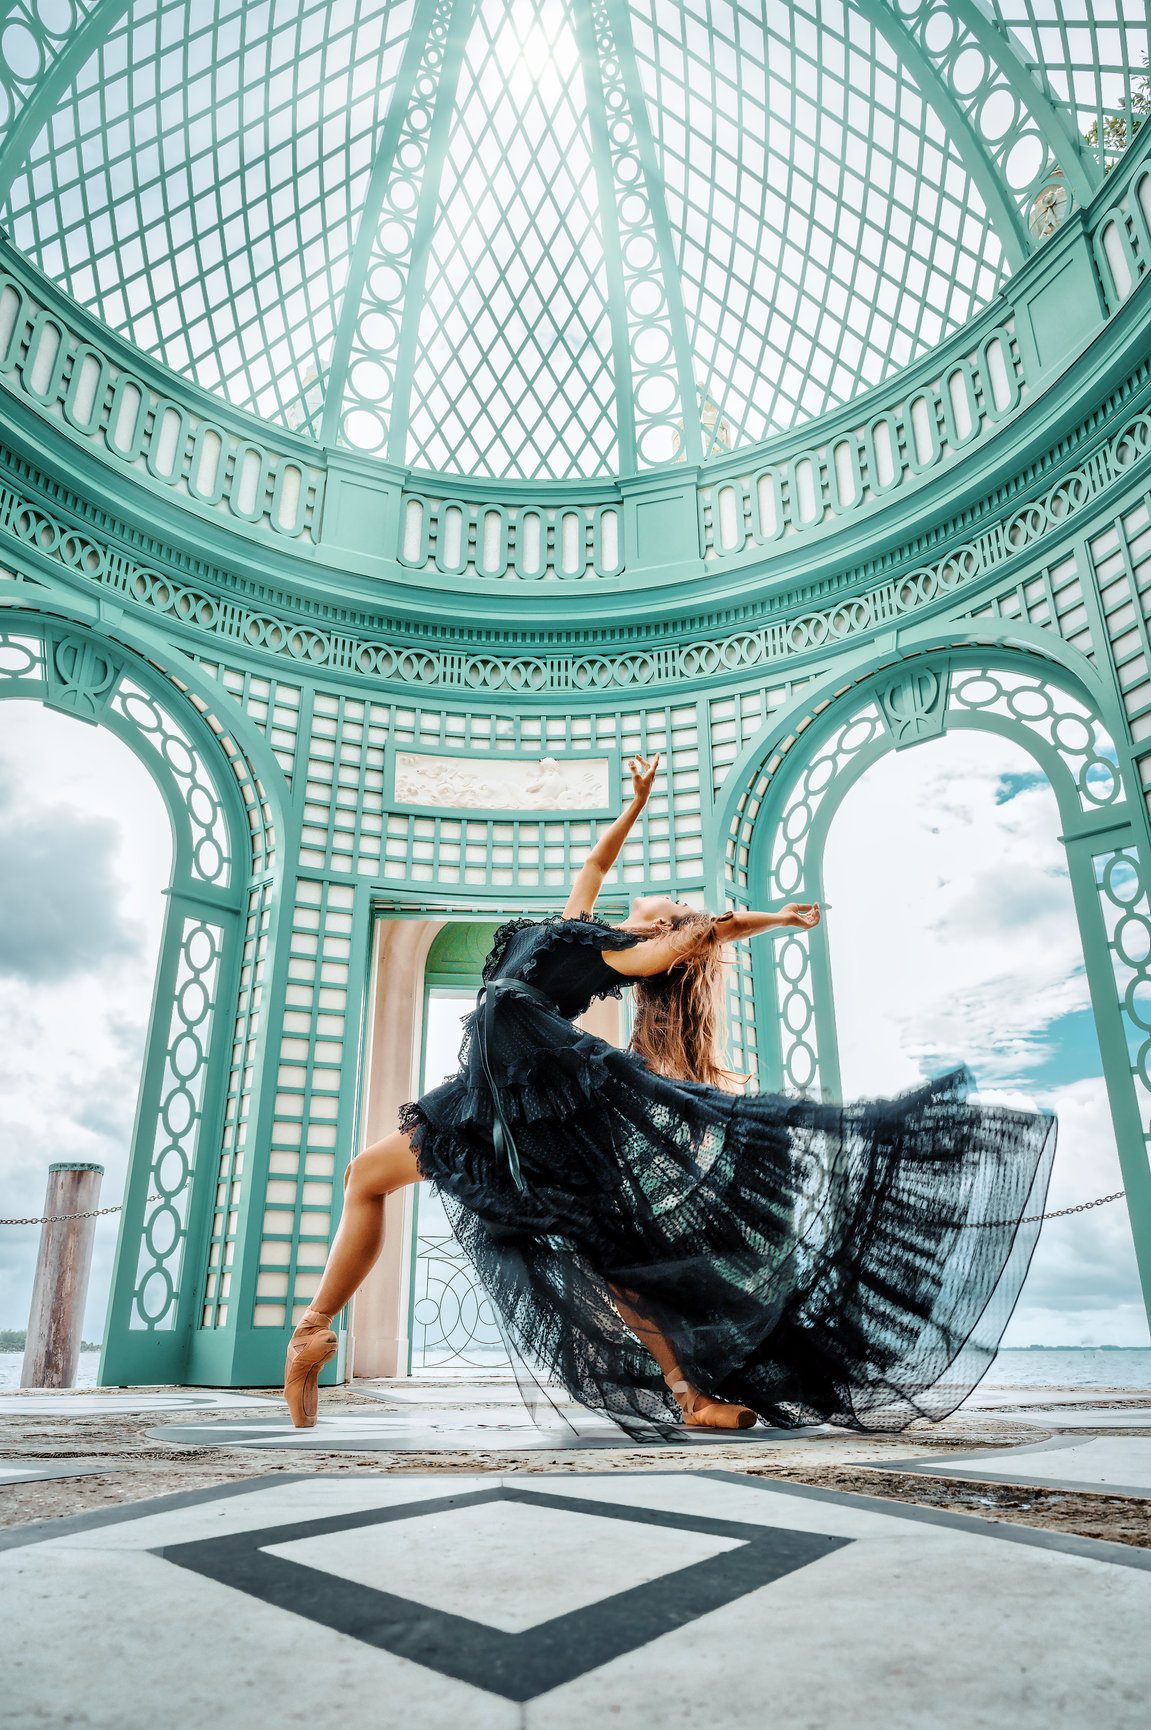 Fashion Photography: Ballet Dancer in Black Dress in Vizcaya by Jessica McKnight Photography